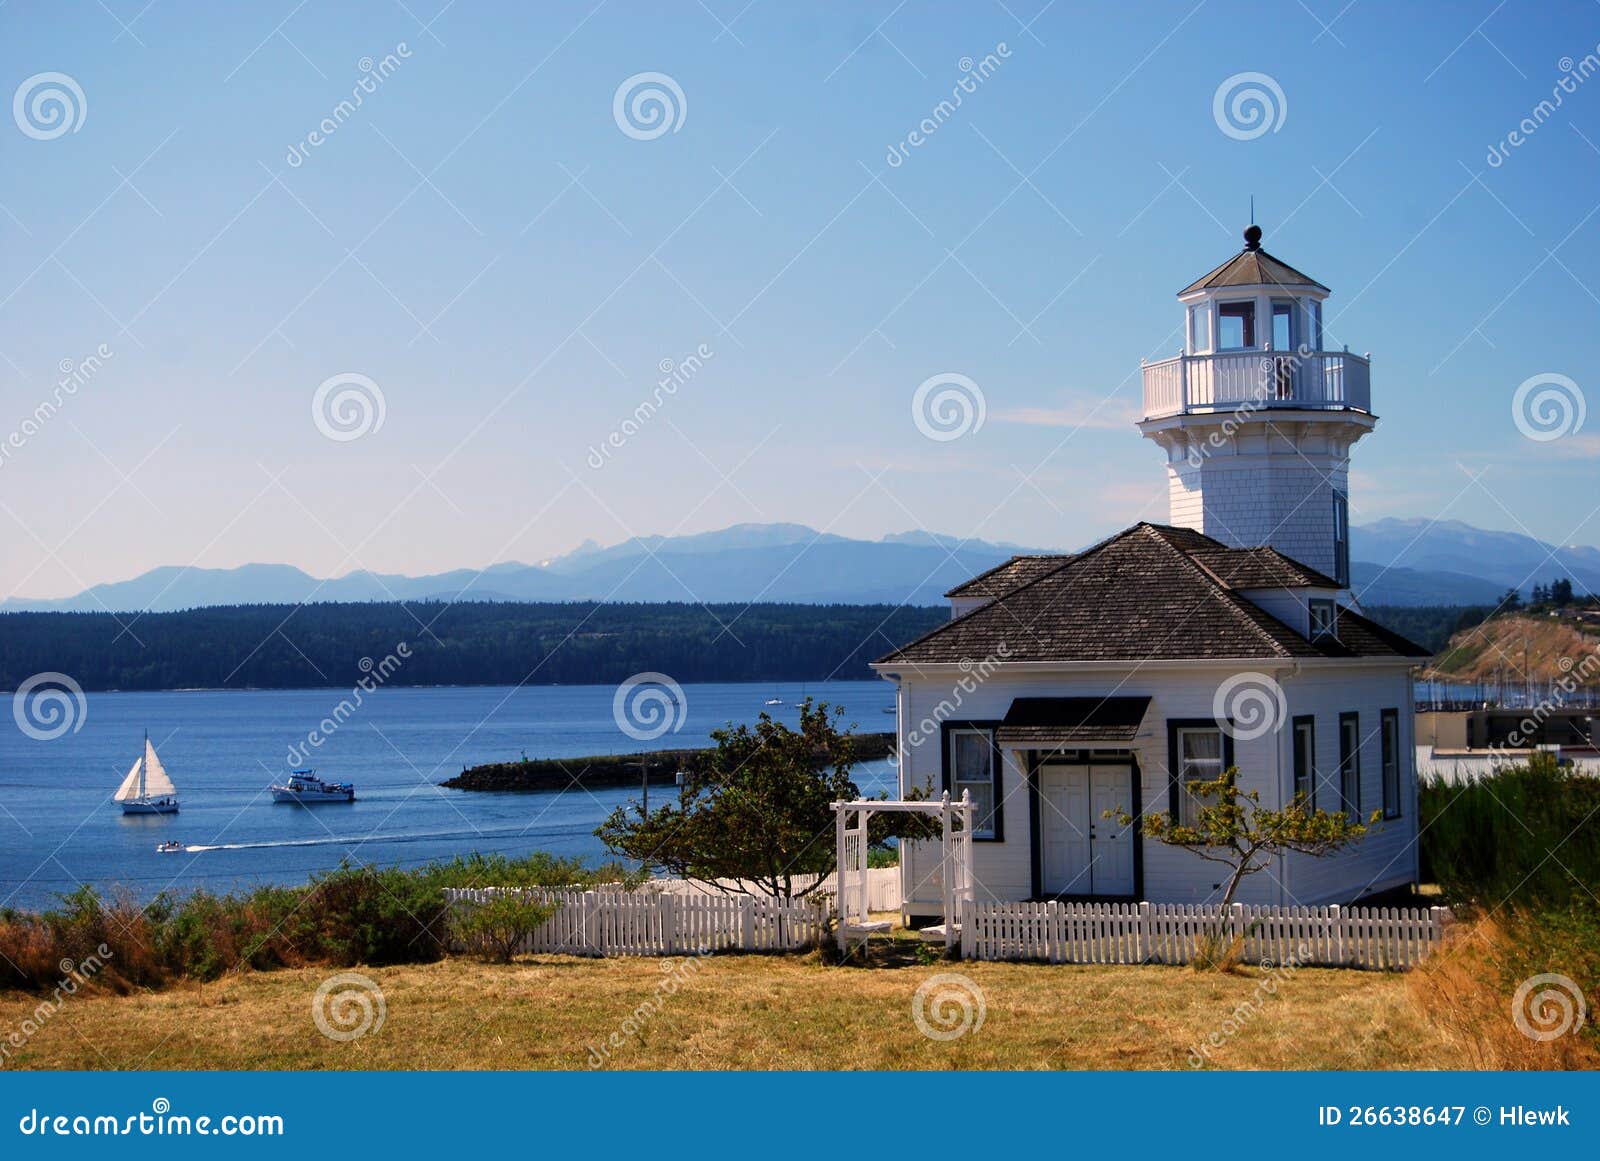 lighthouse in port townsend